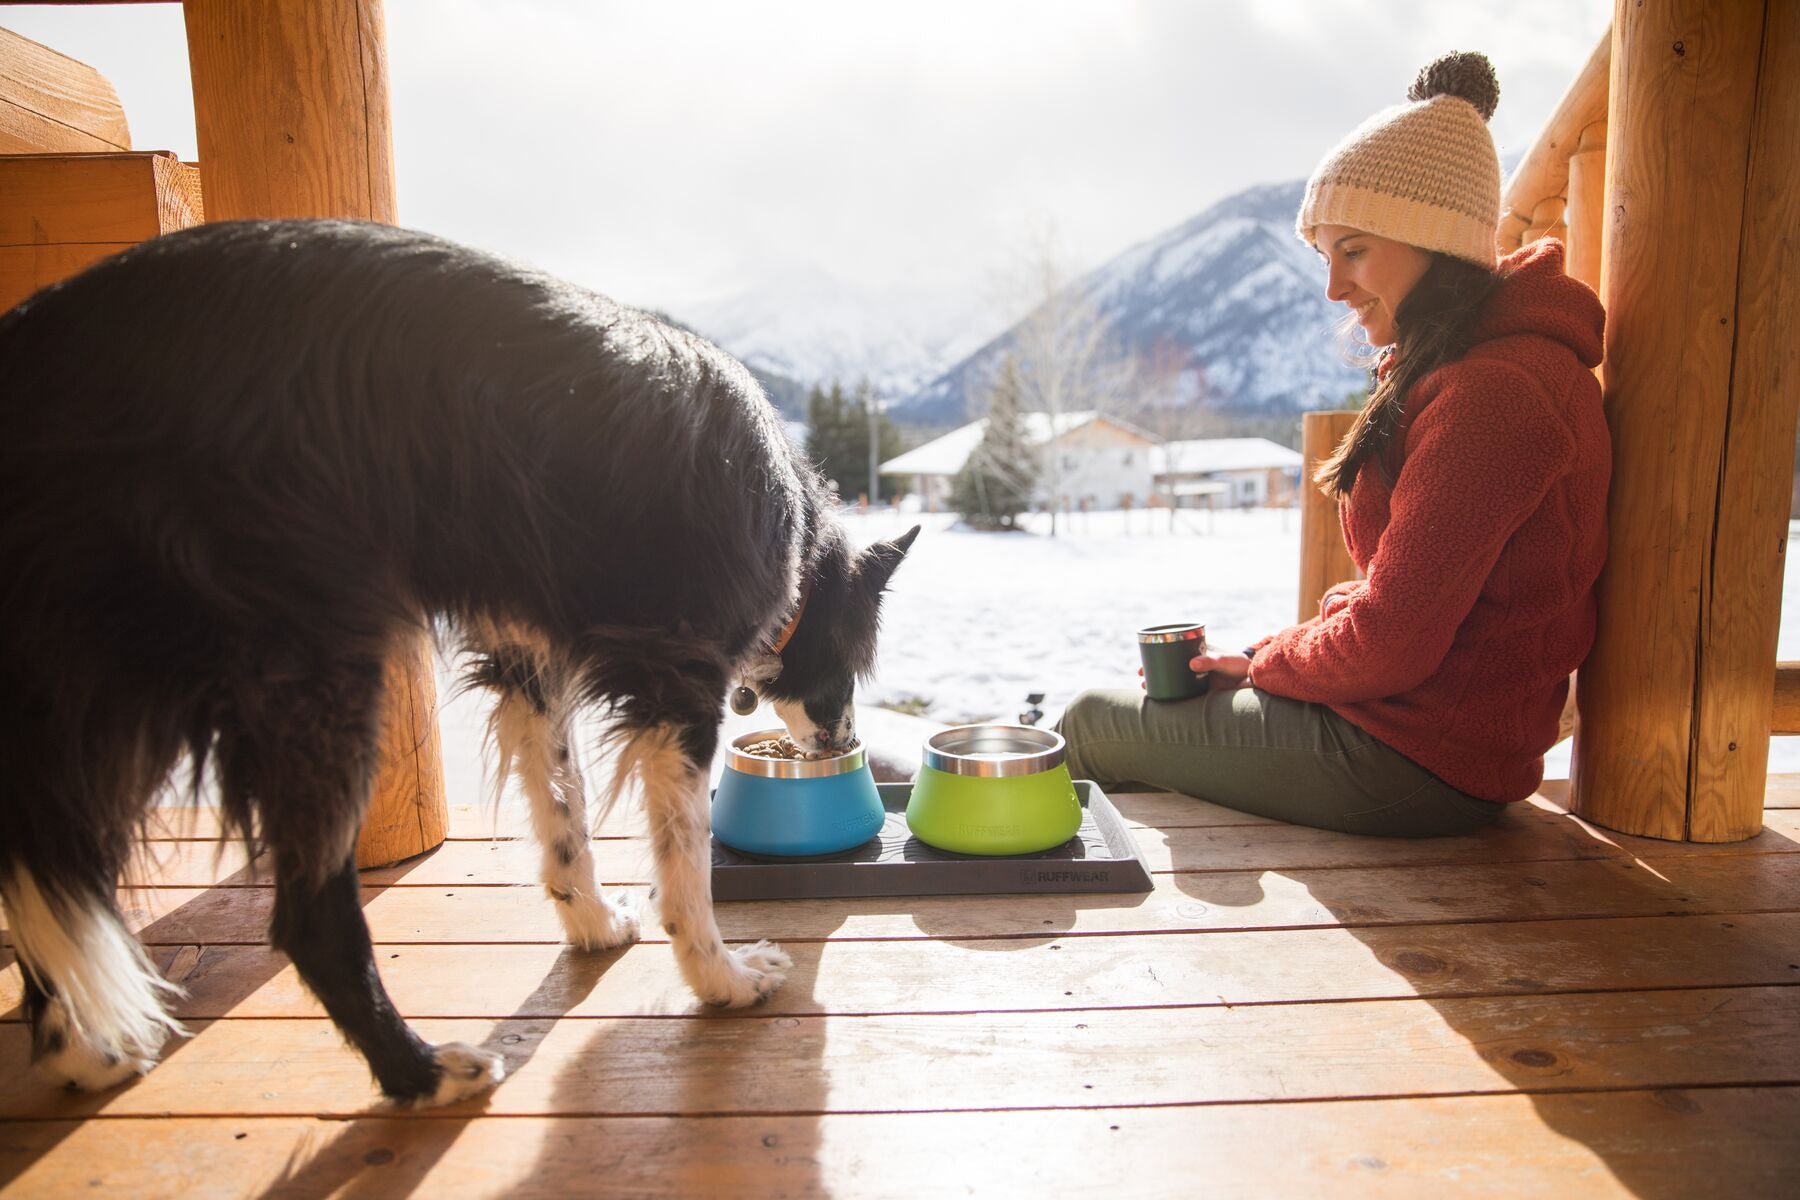 Dog eats out of basecamp bowls on the porch of a cabin.